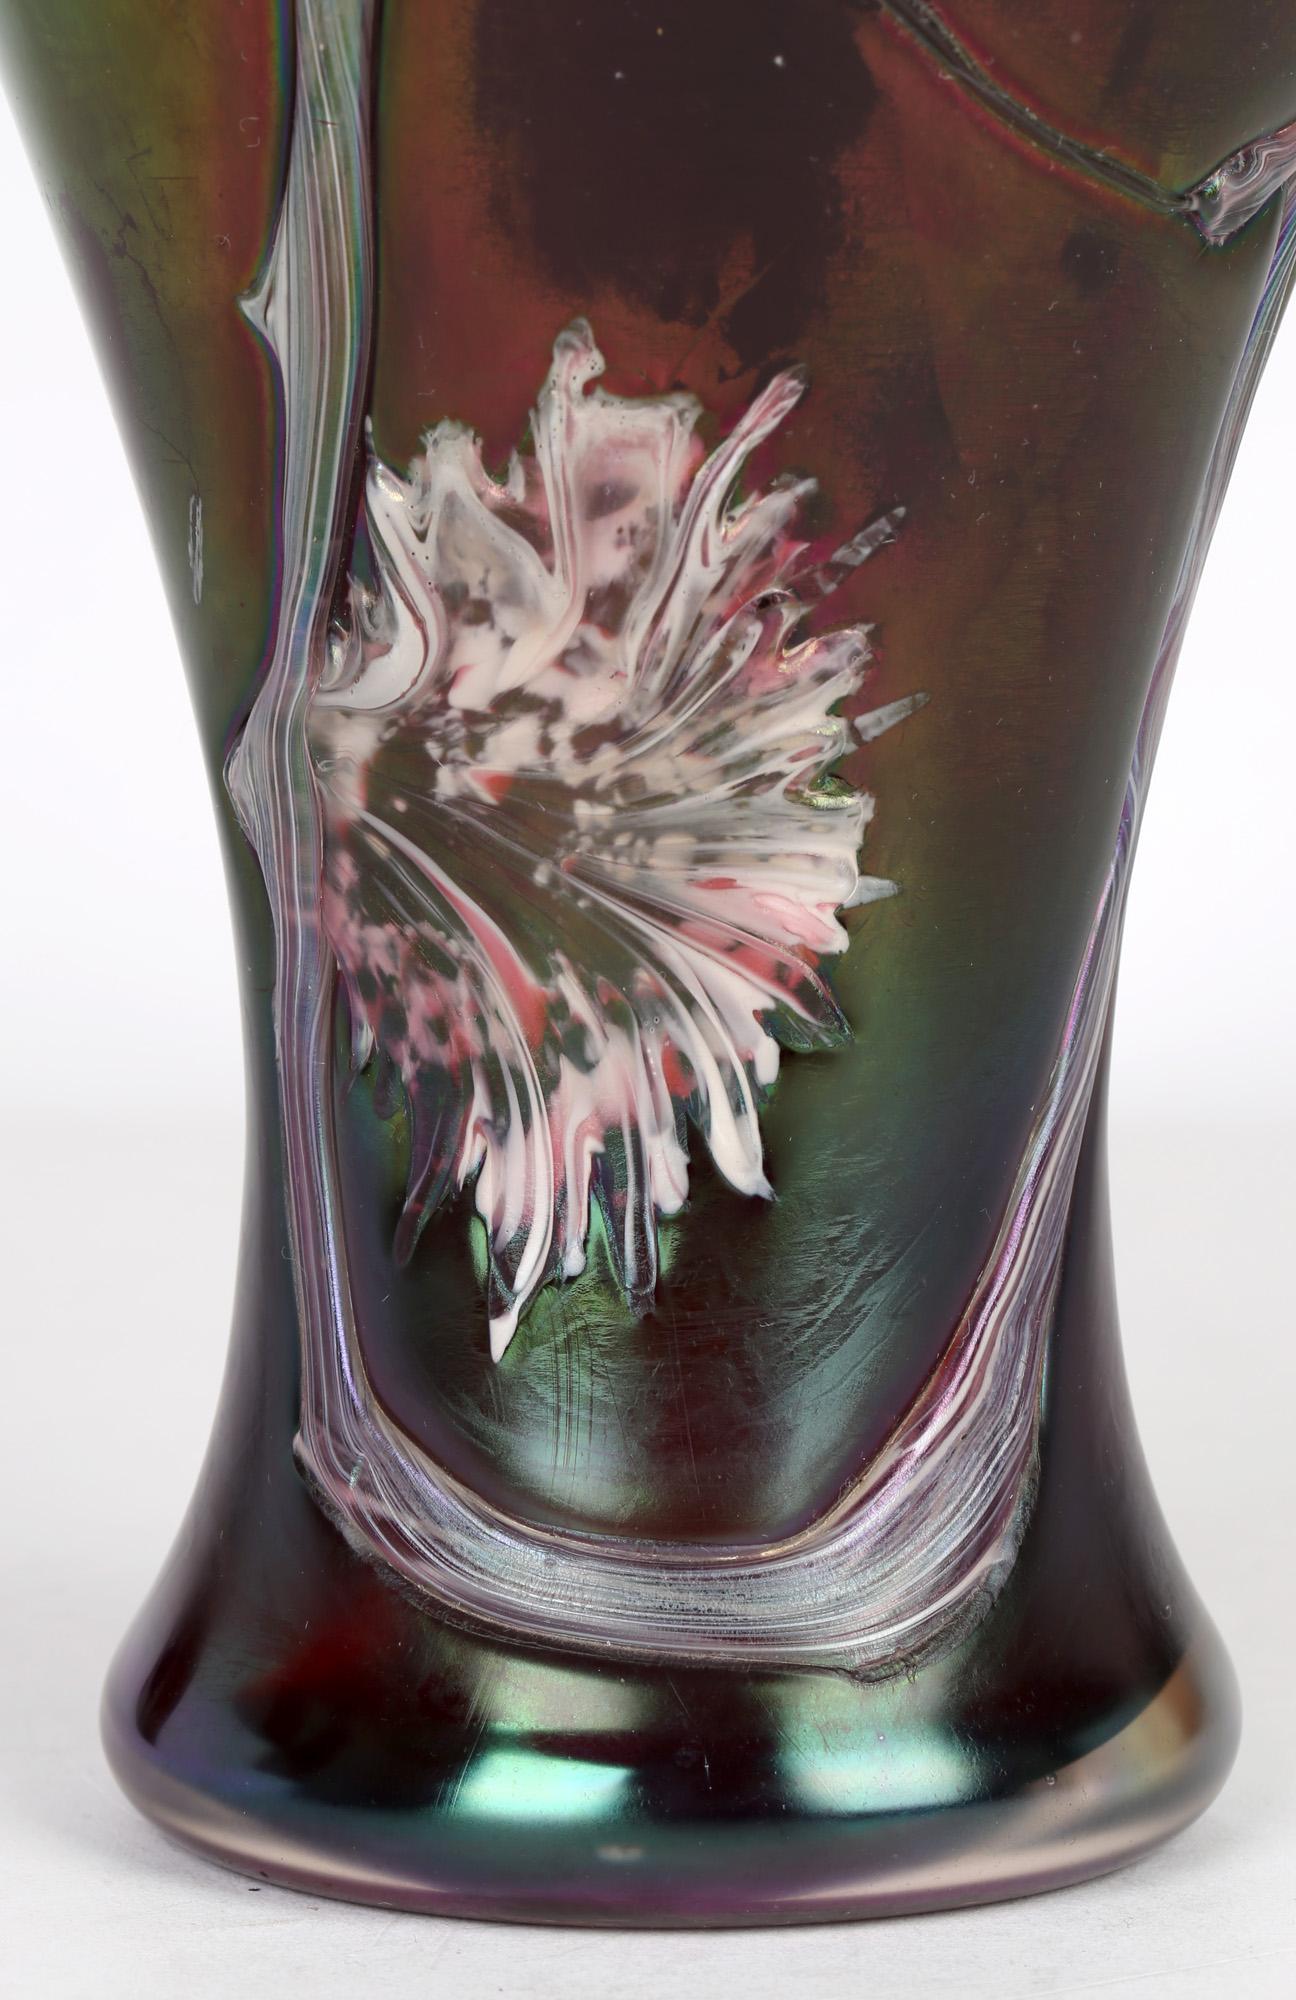 A large and exceptional Bohemian Art Nouveau iridescent glass vase applied with flower head designs by Pallme-Konig dating from around 1900. This tall elegant vase is applied with trailing pink and white stems with abstract flower heads against an